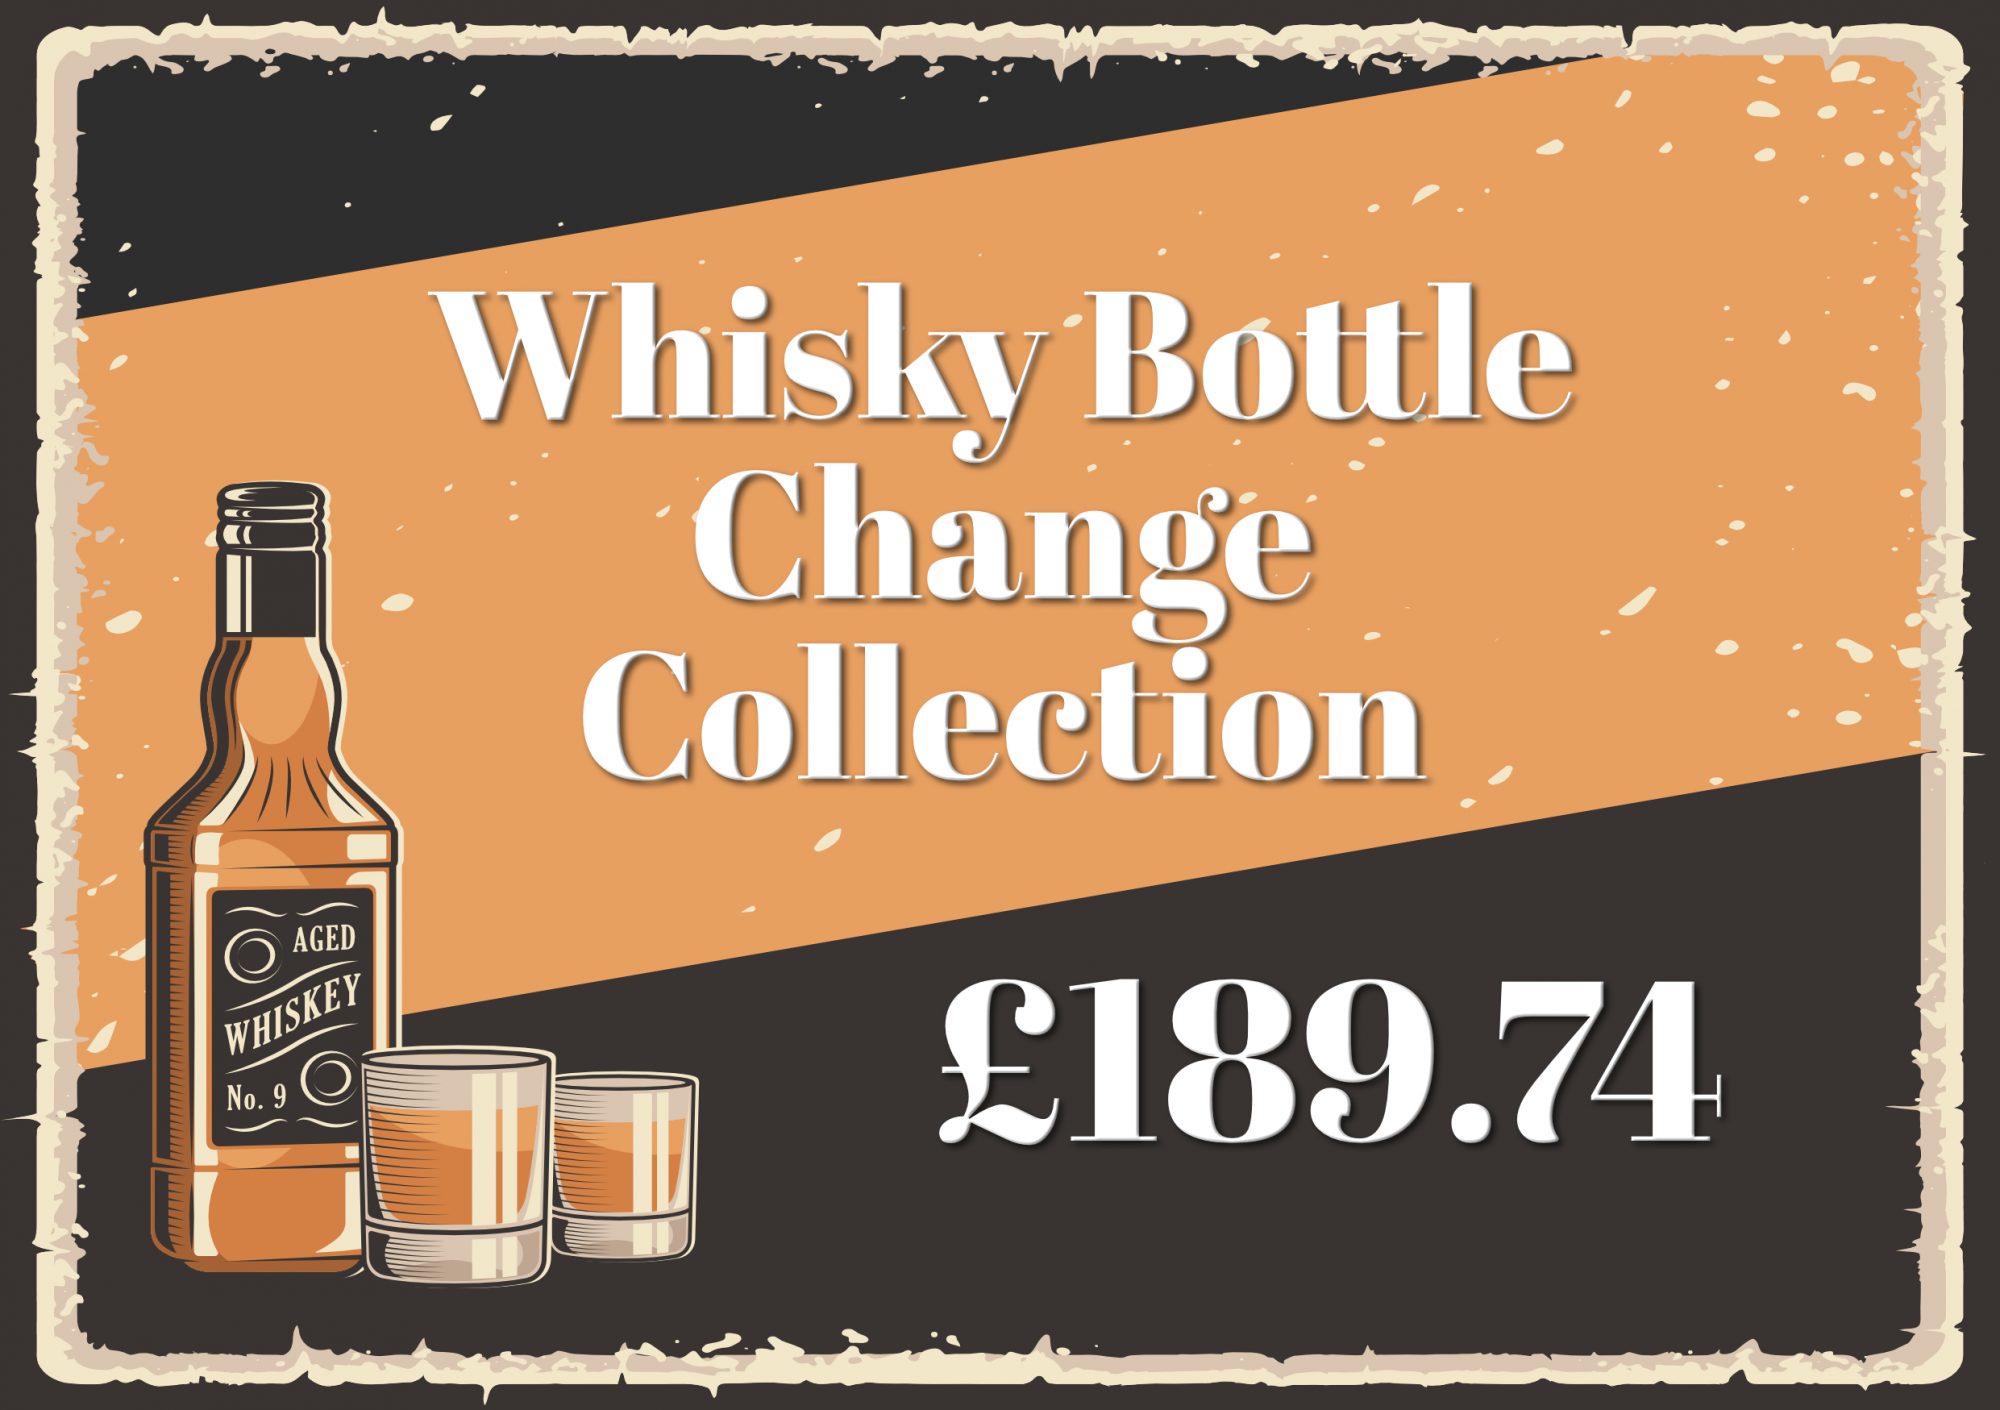 Whisky Bottle Change Collection - £189.74